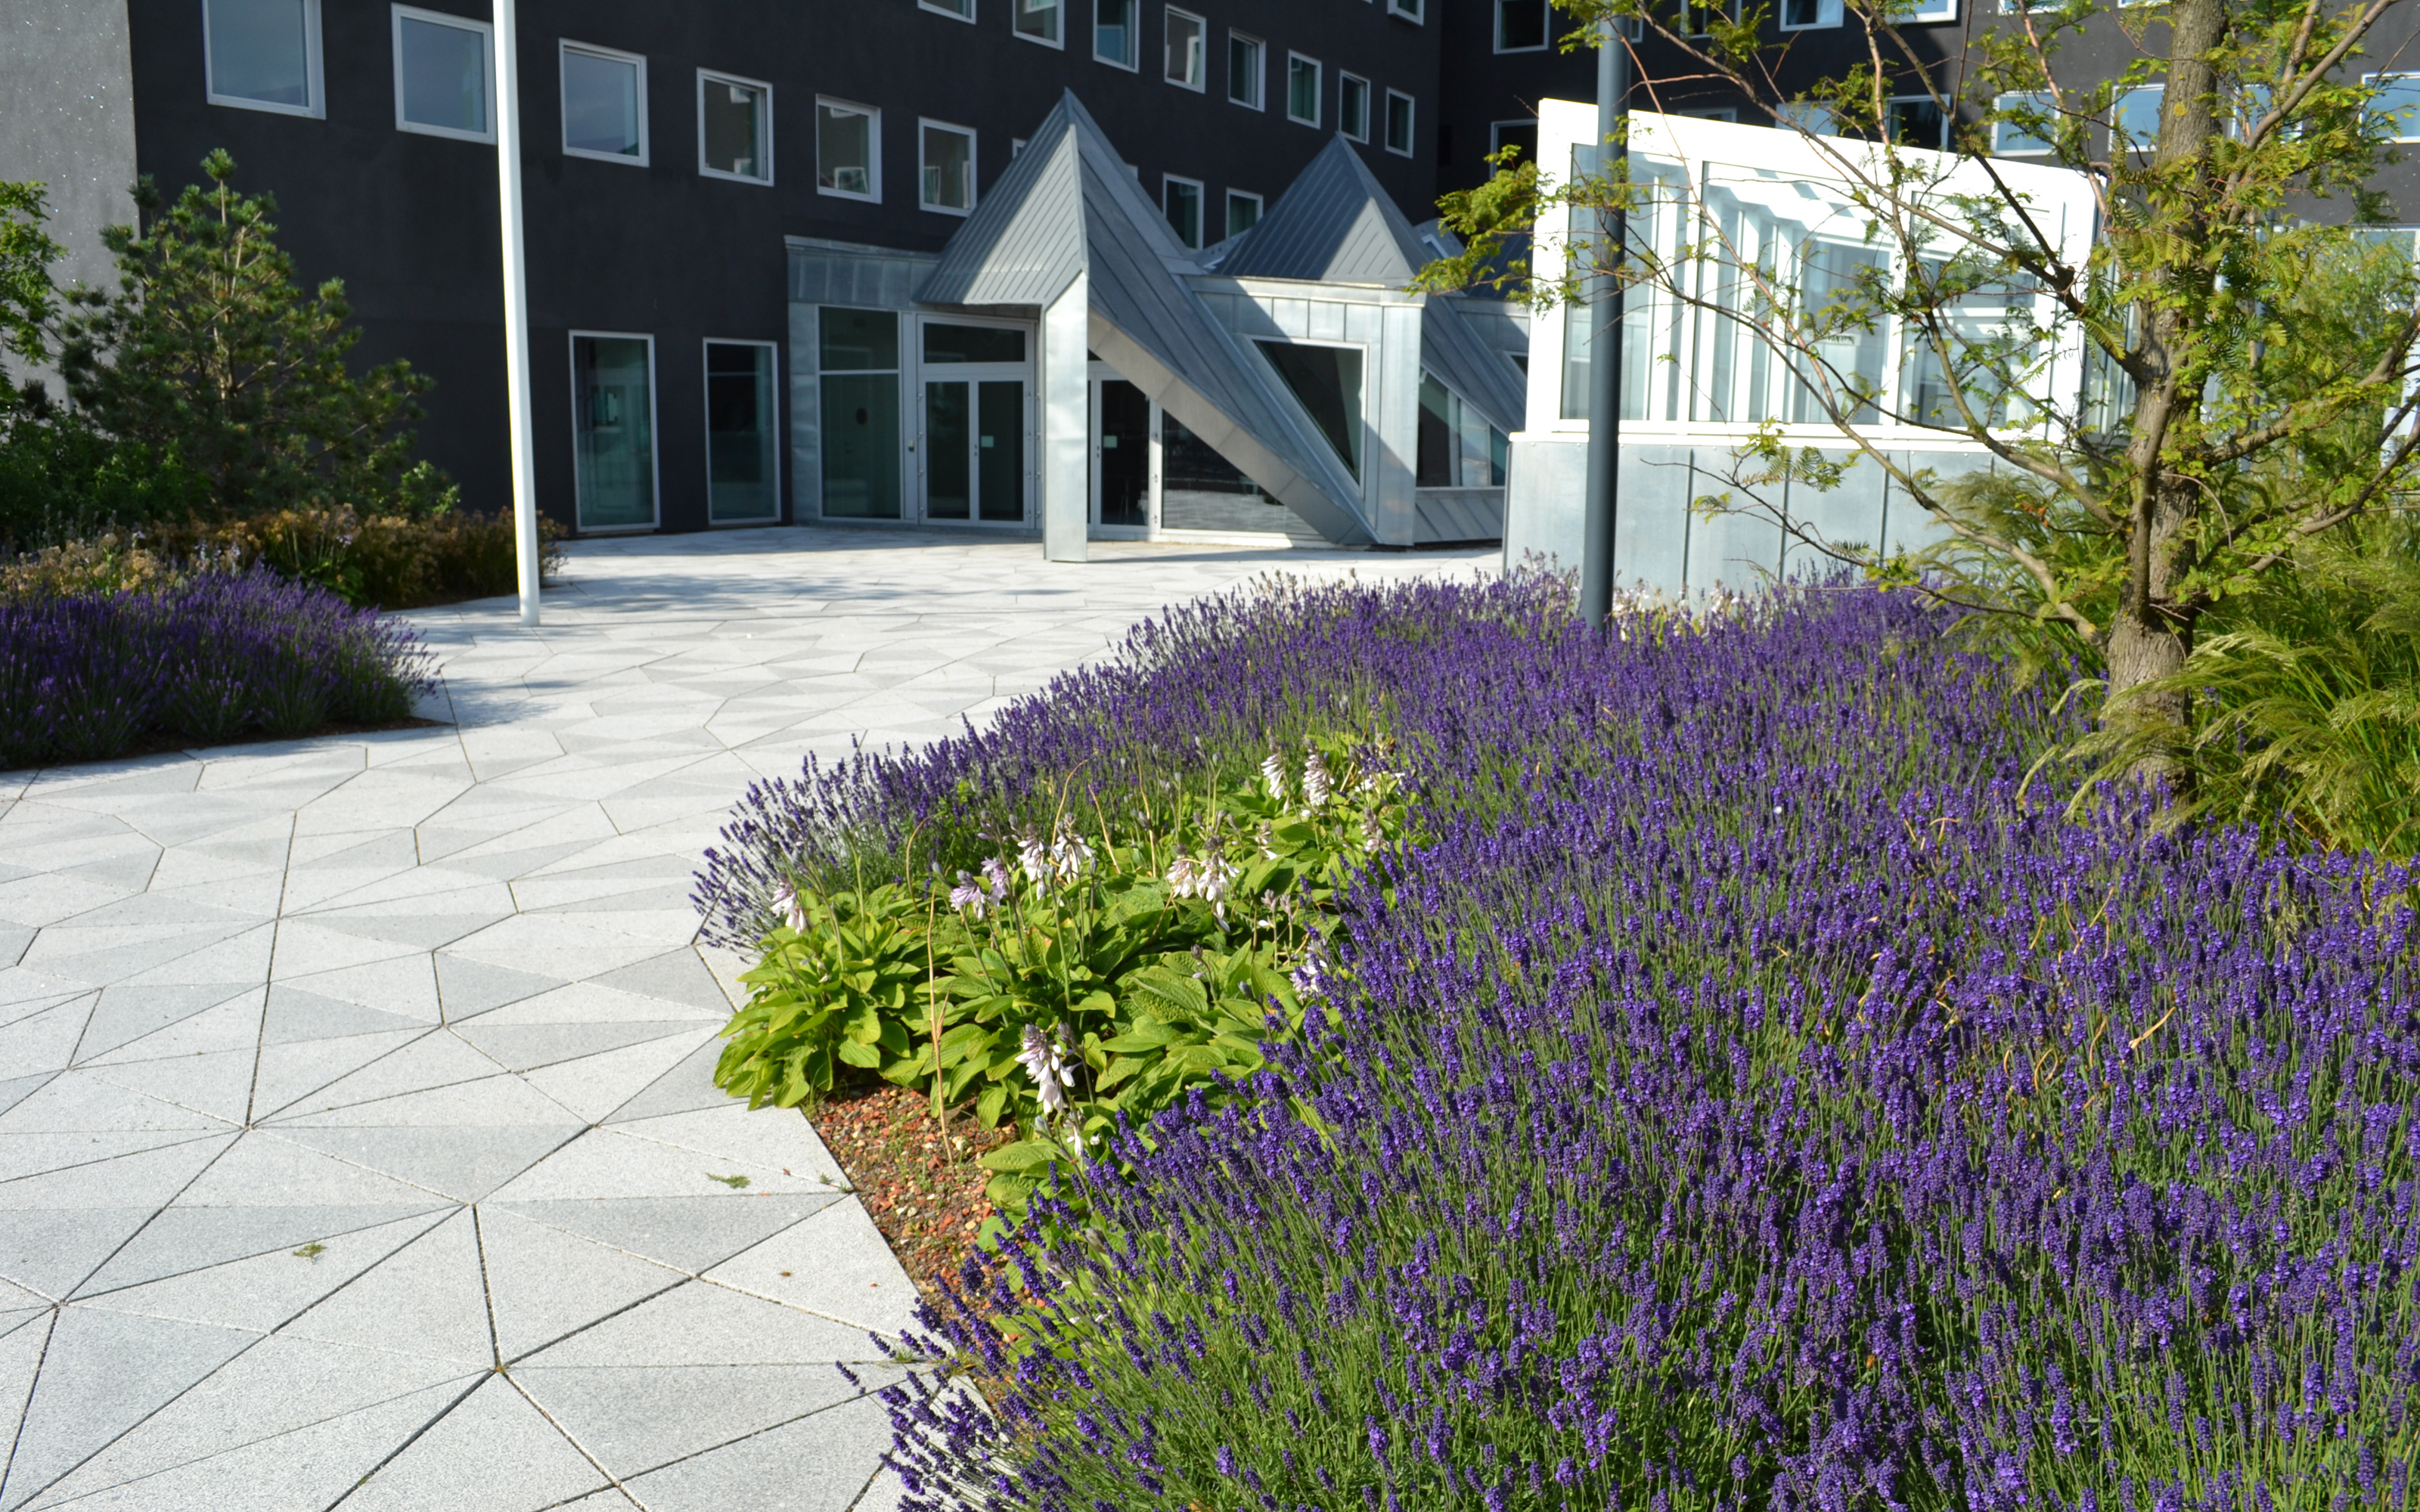 Walkways and plant beds with lavender